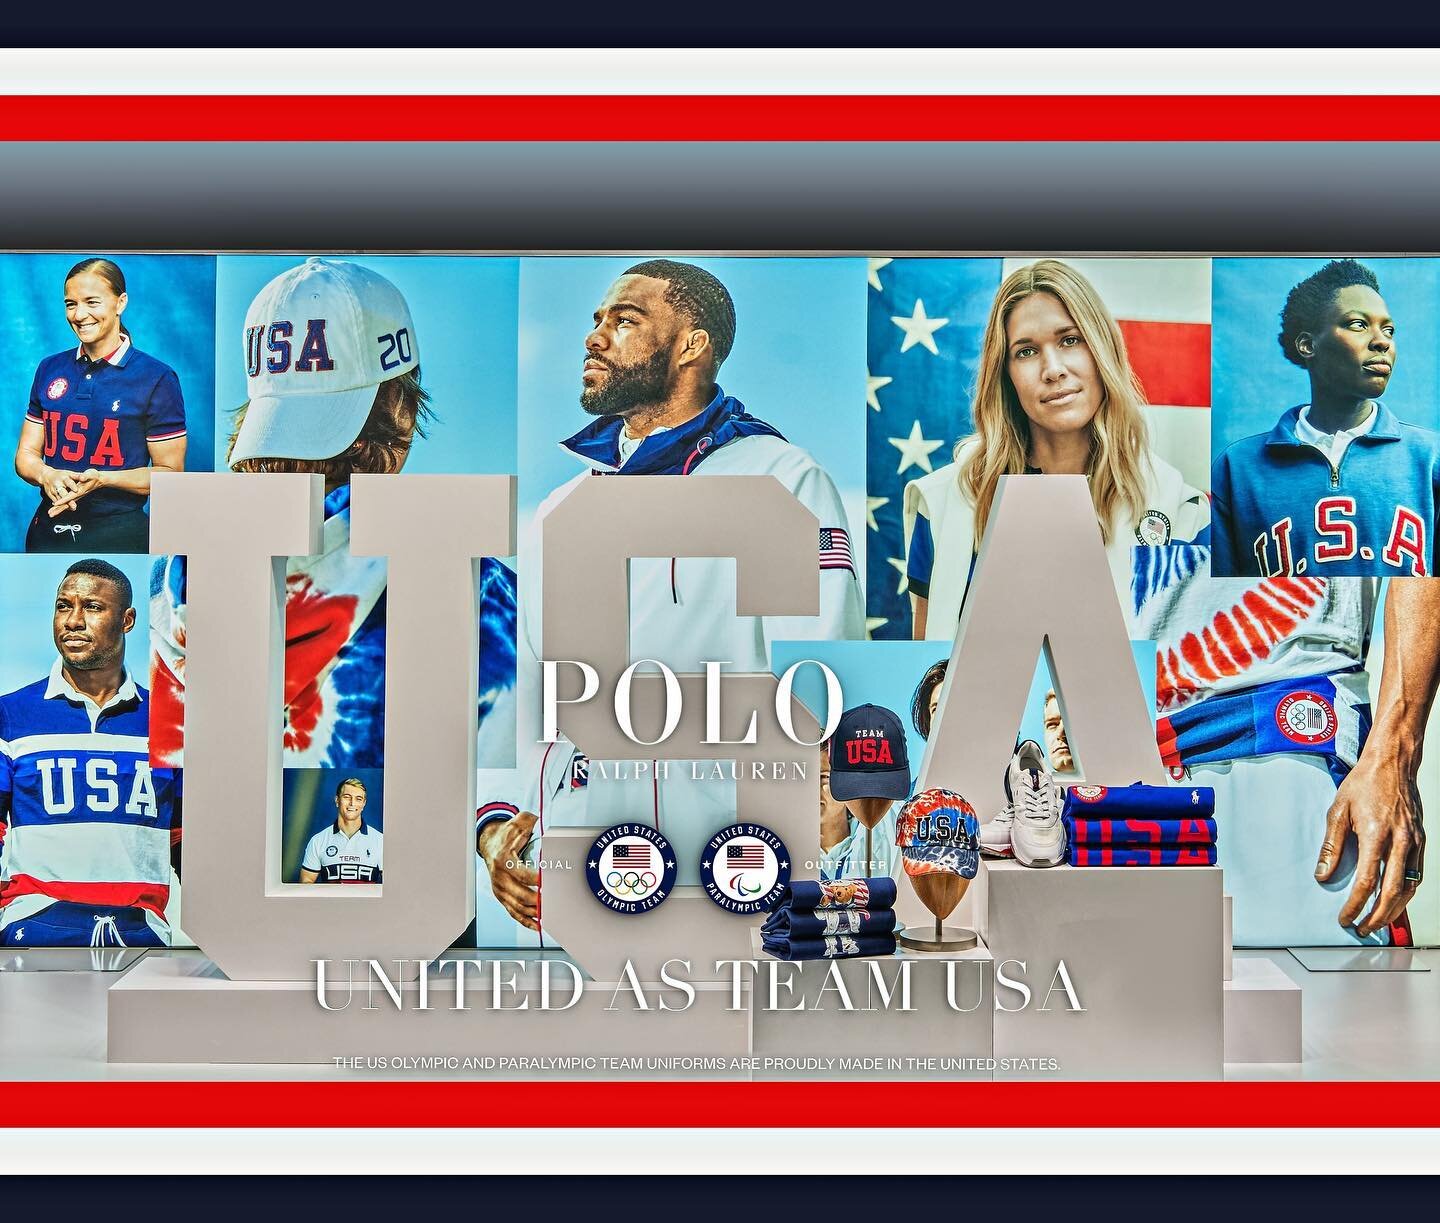 Go Team USA! Proud to cheer on our athletes through creating these windows with Ralph Lauren, currently live at Macy's Herald Square. Check them out!
.
.
.
.
Photos: @billwaldorf 
#standardtransmission #creativetechnology #fabrication #design #visual